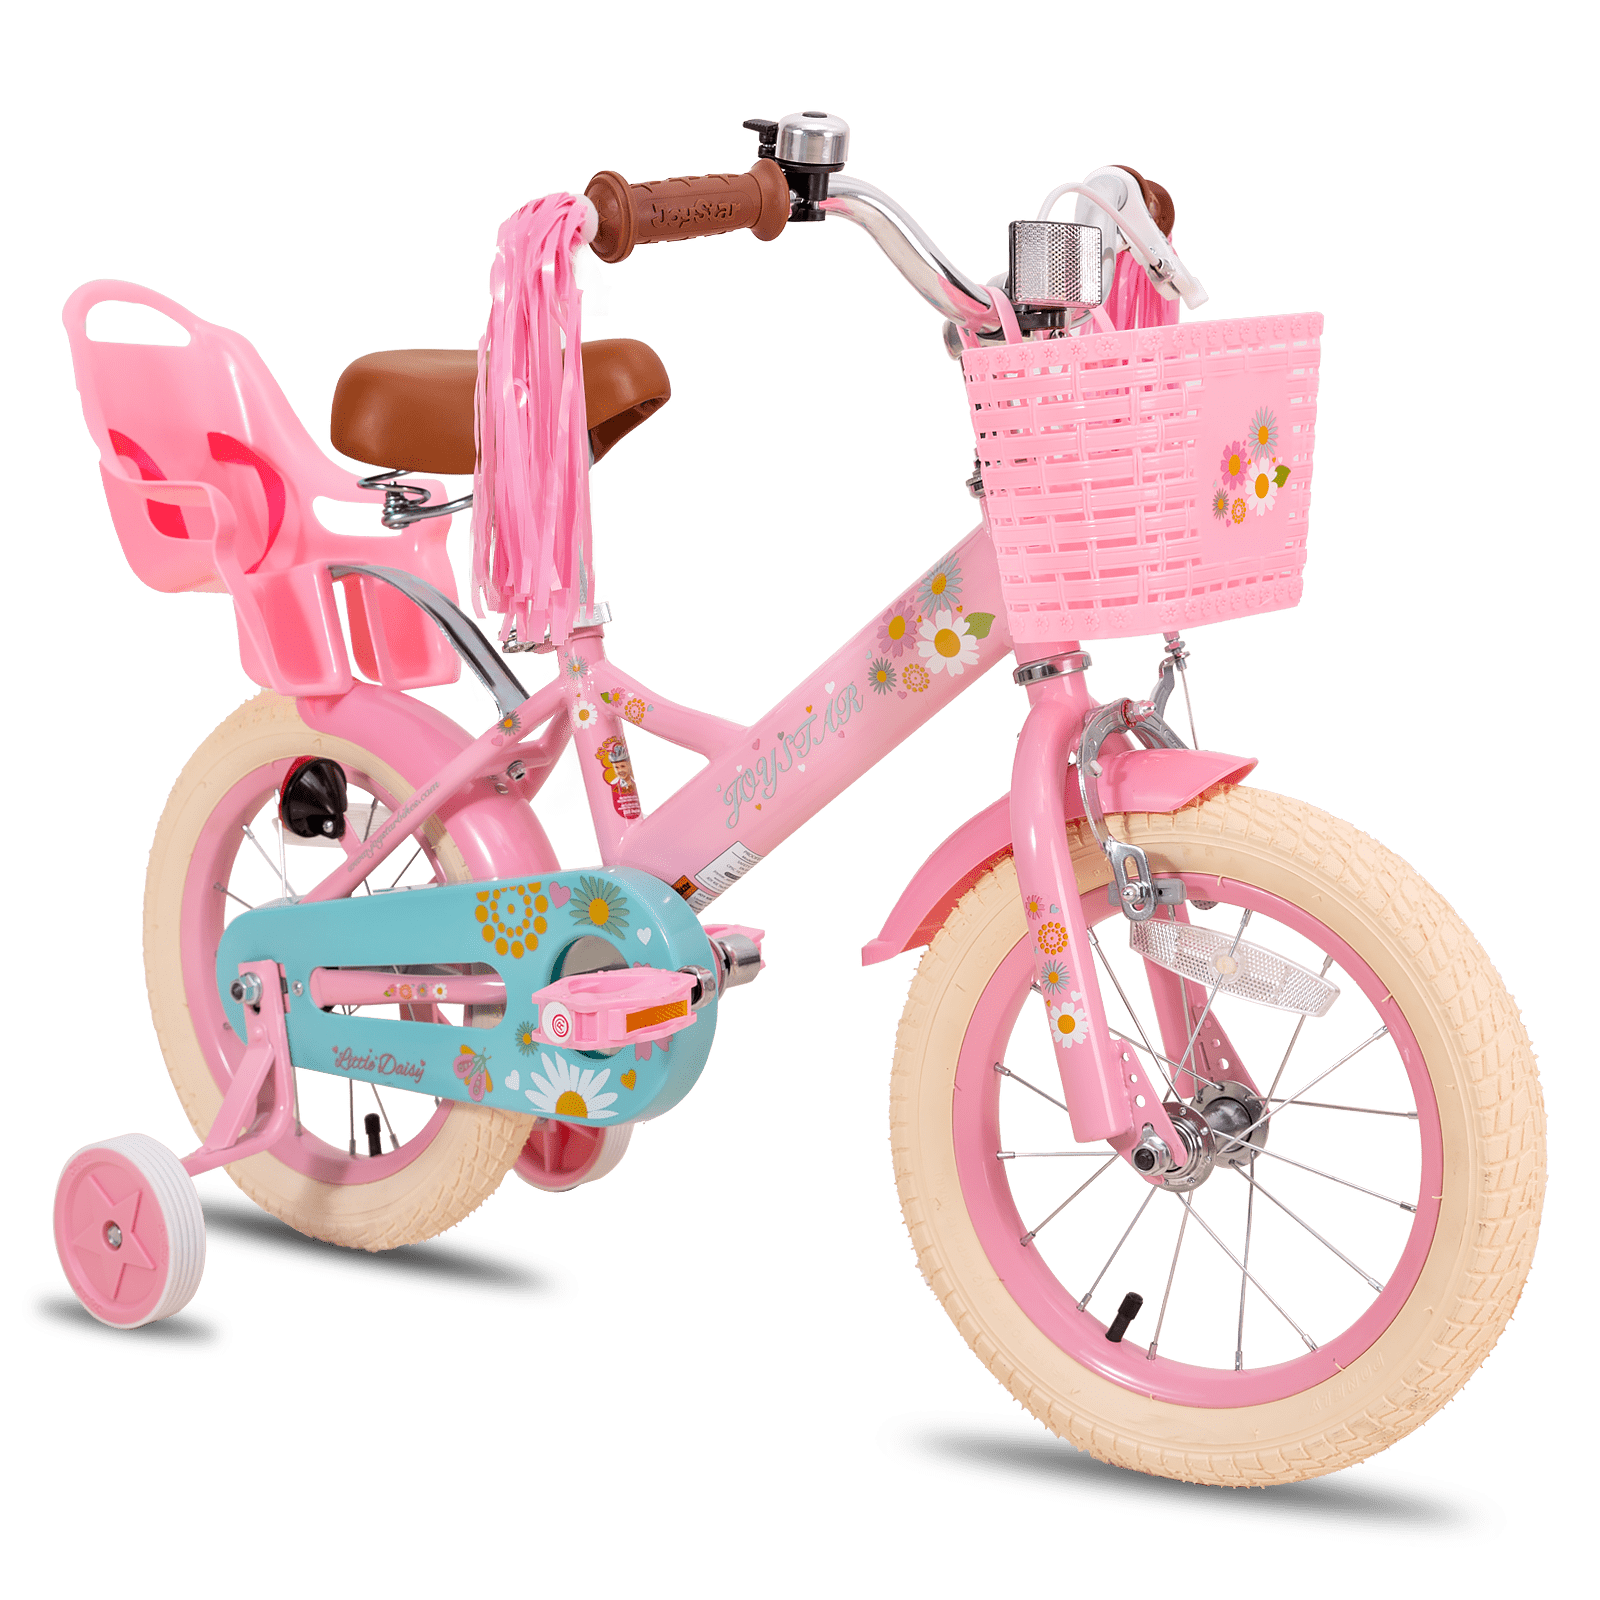 Fashionable Cycling Motorbike Shopping Face Cover Womens Pink Daisy 